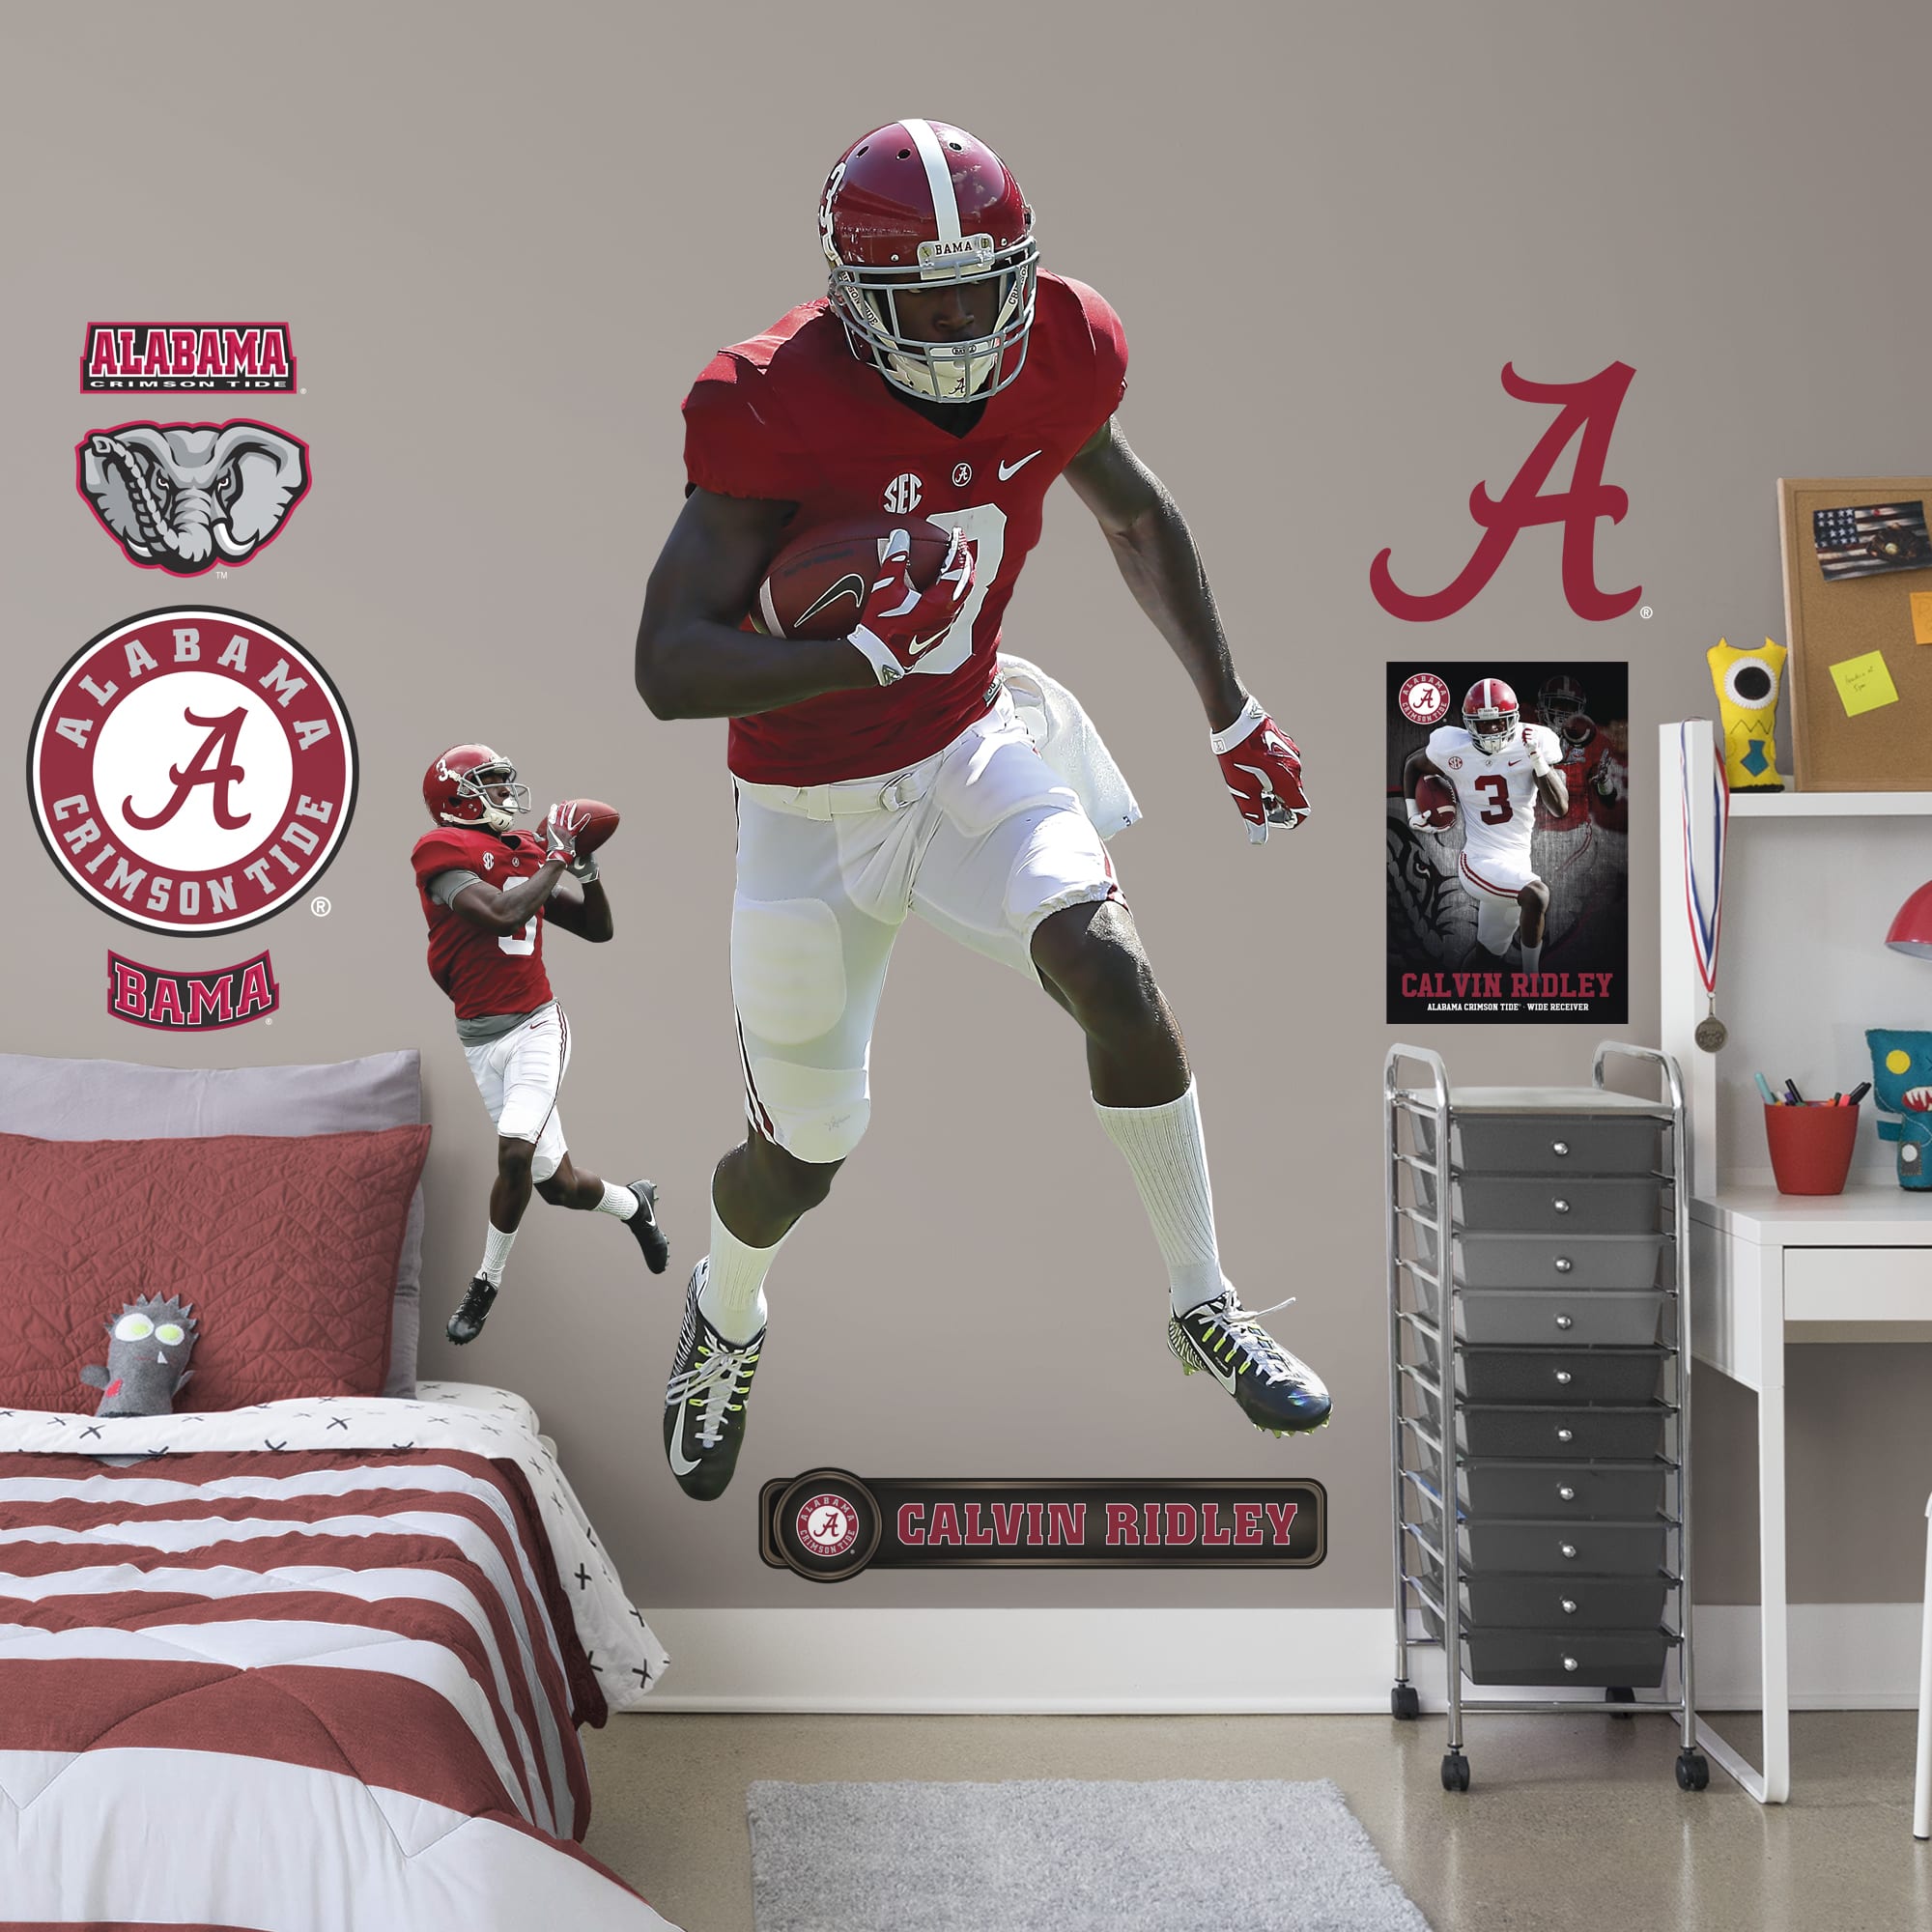 Calvin Ridley for Alabama Crimson Tide: Alabama - Officially Licensed Removable Wall Decal Life-Size Athlete + 10 Decals (39"W x